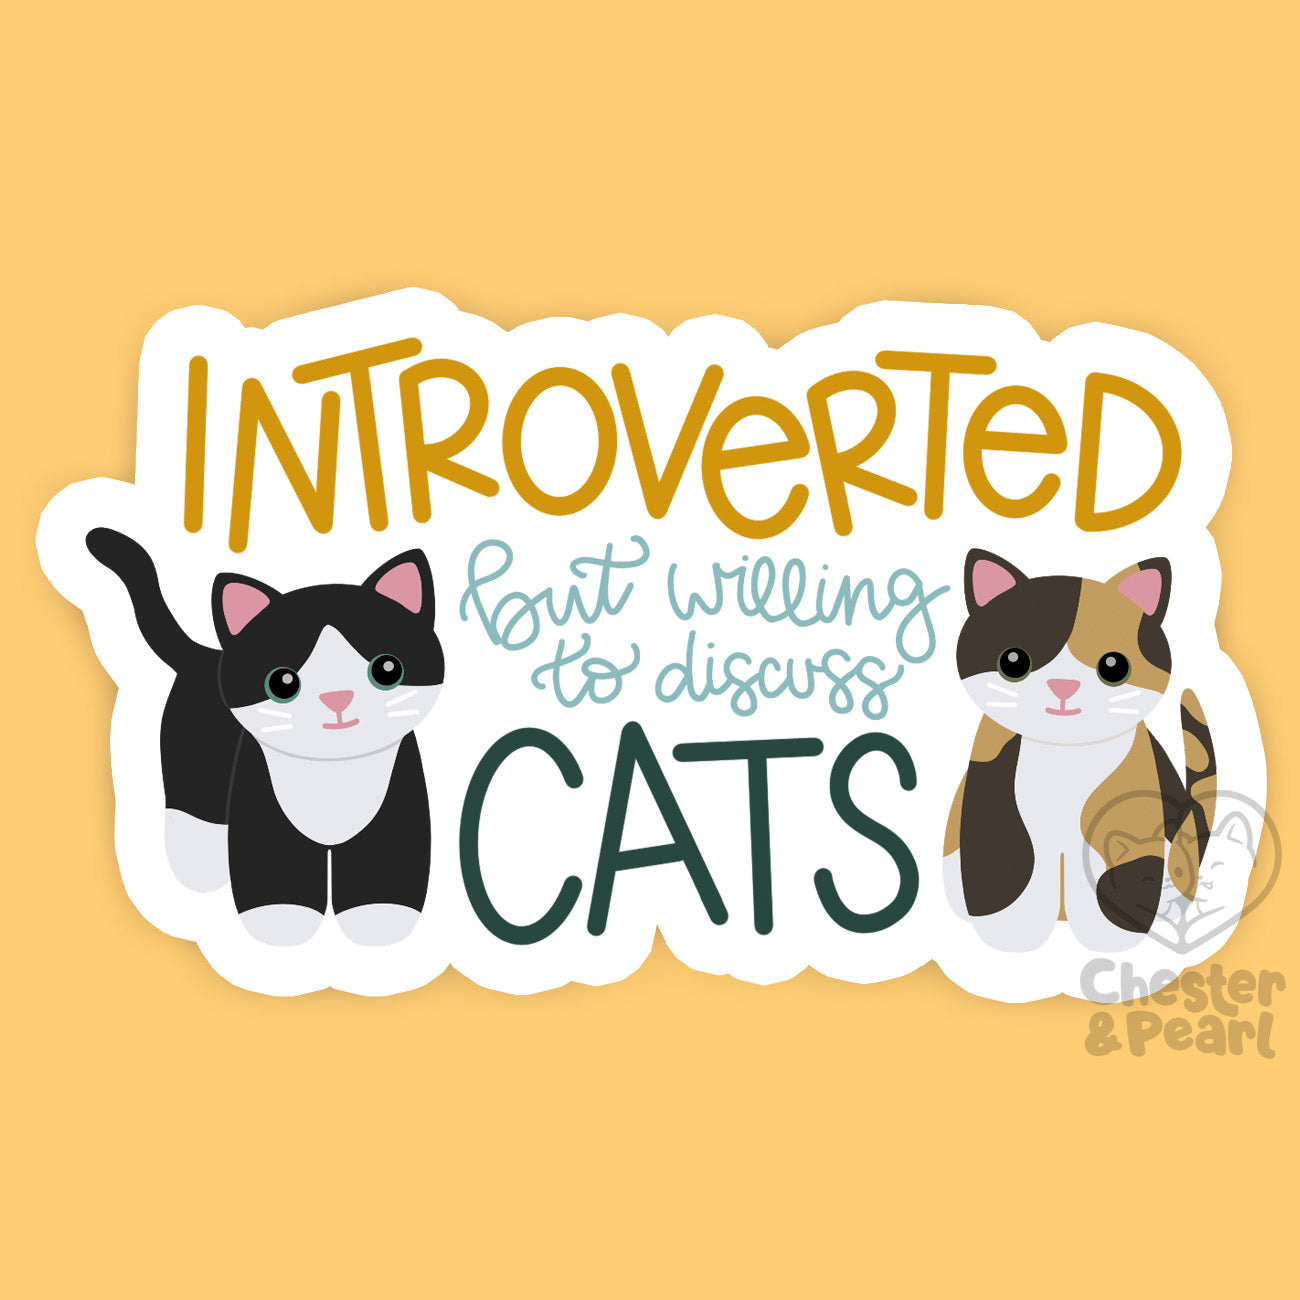 Cat Lover? You're More Likely to Be an Introvert